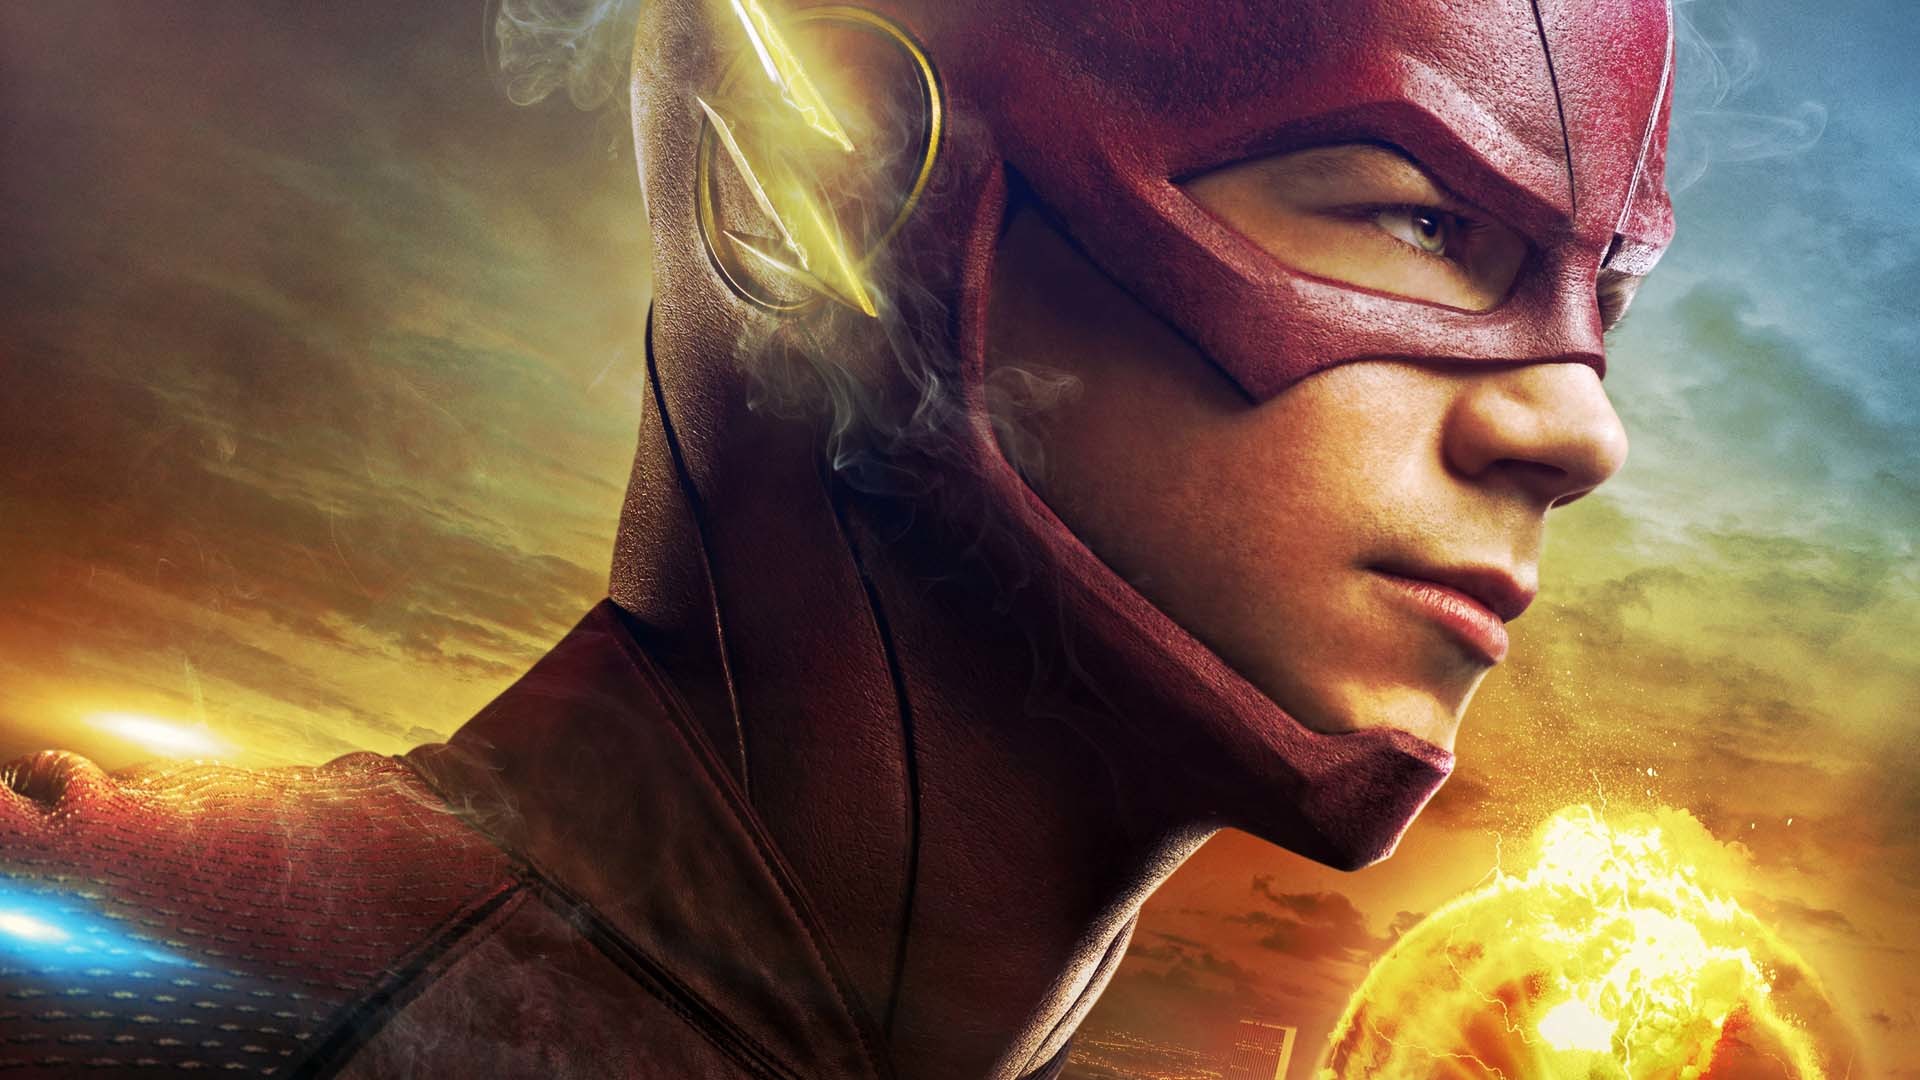 1920x1080 The Major Theme Of The Flash Season 2: How A Superhero Deals With Fame